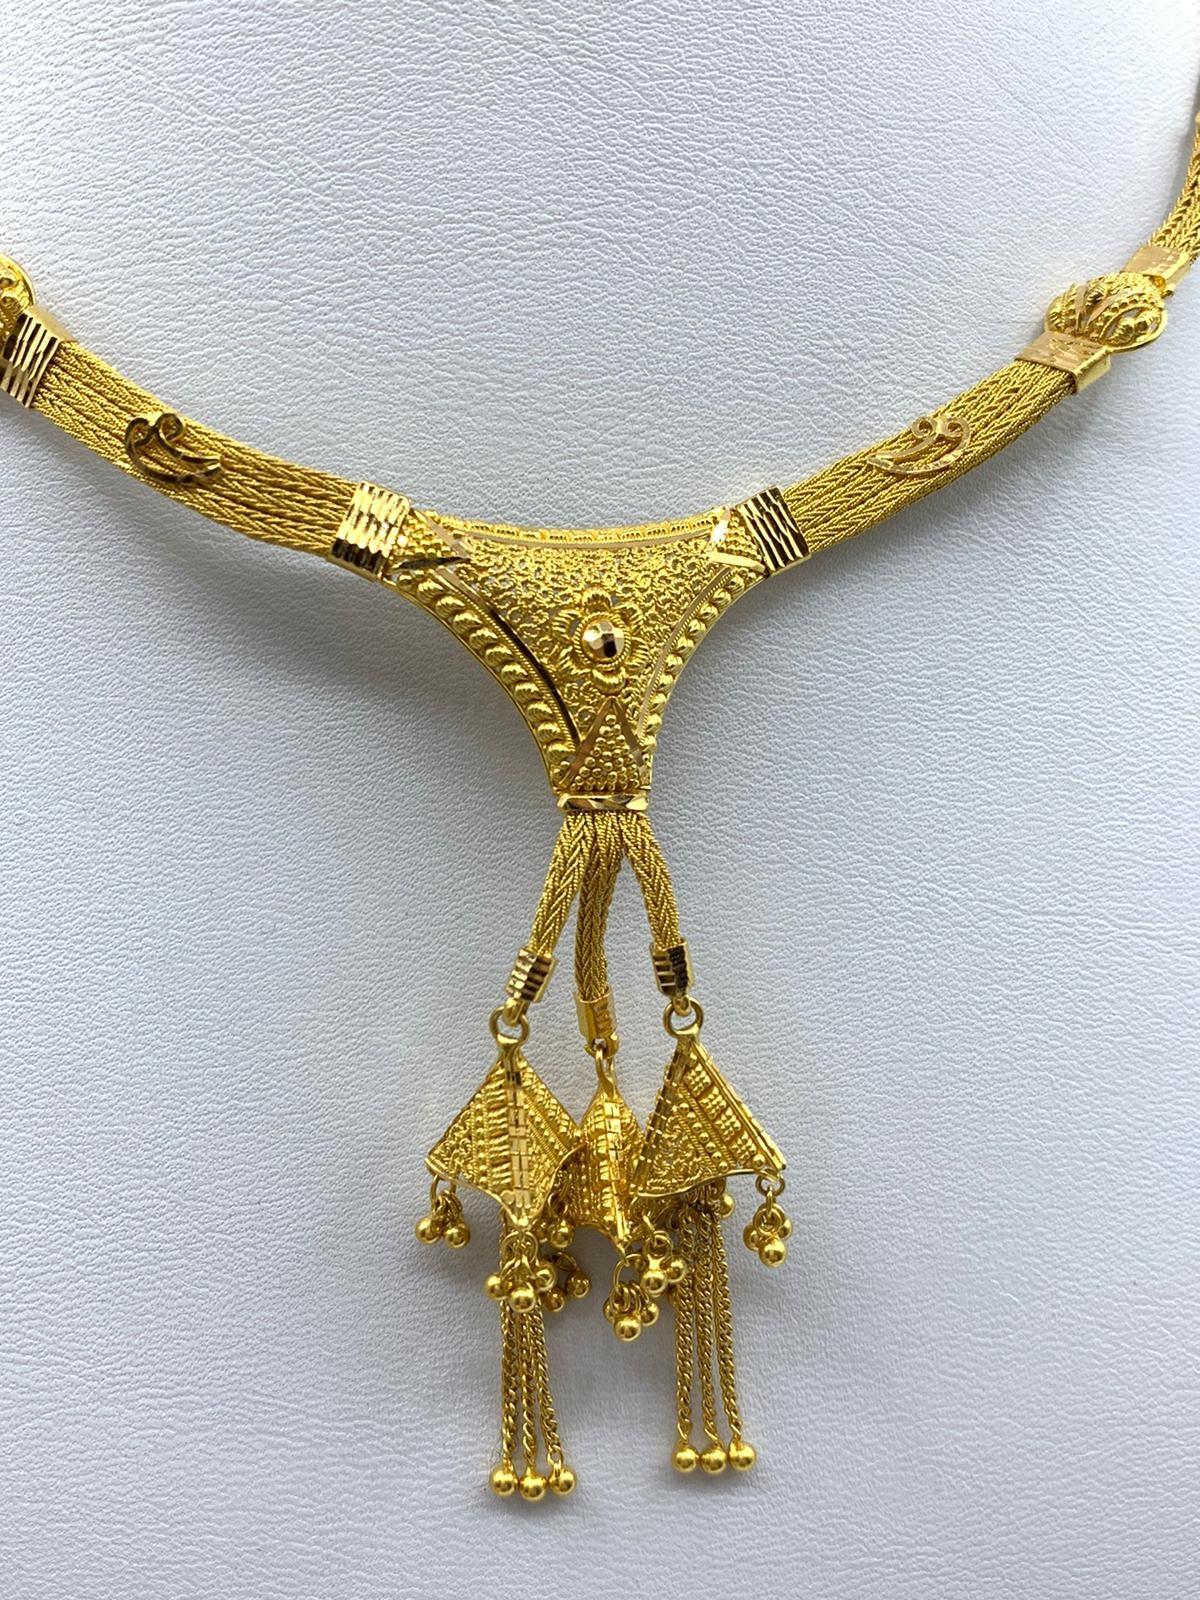 22ct yellow gold necklace, weight 26.6g and 36cm long approx (3-1951 ref) - Image 5 of 6